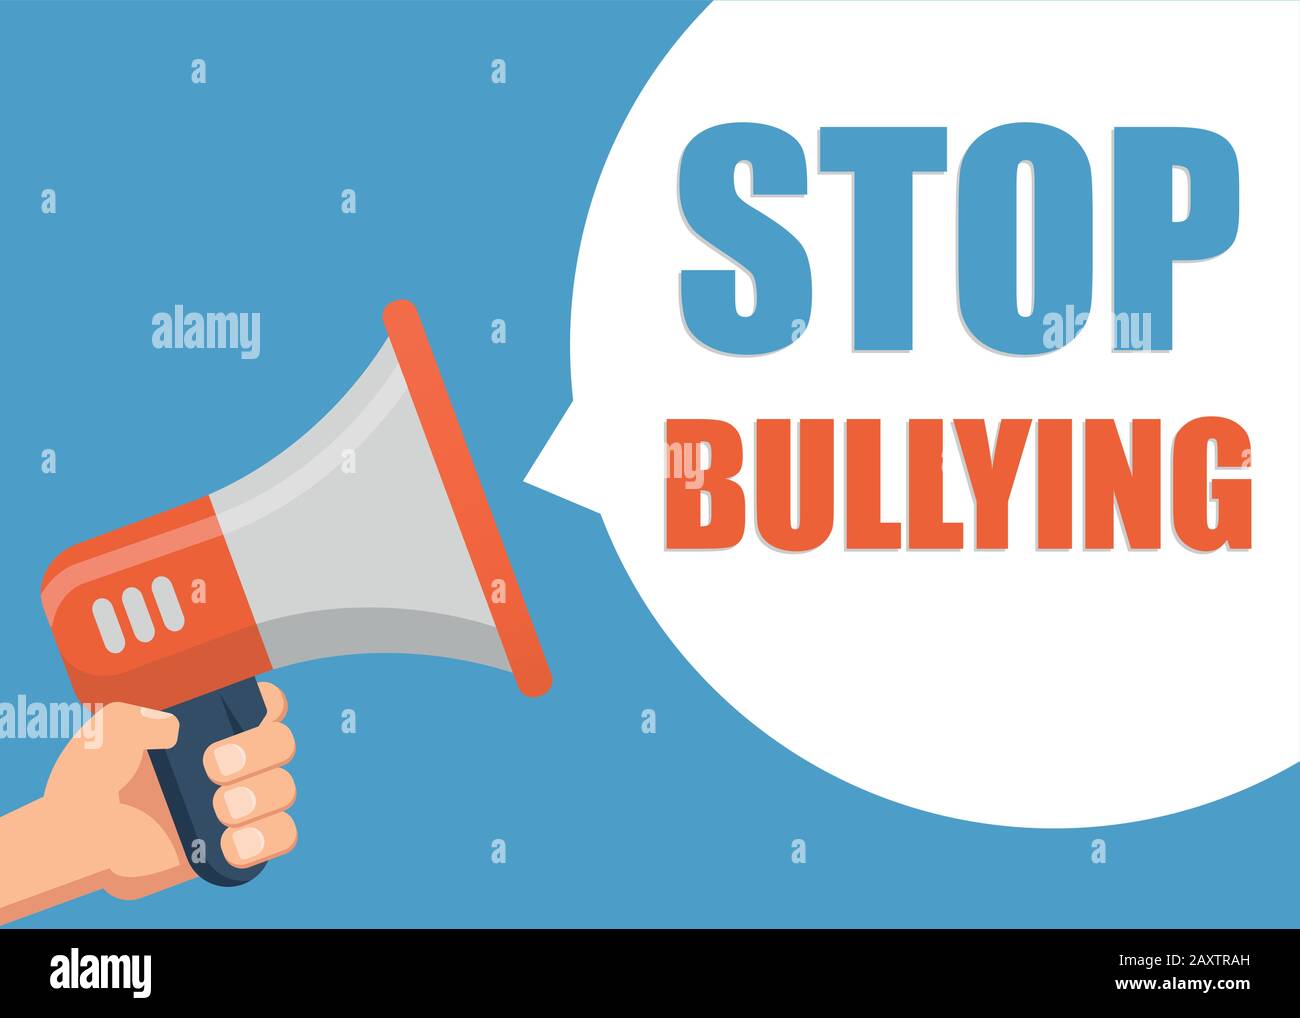 Stop Bullying - Male hand holding megaphone. Flat design. Can be used business company for social media, networks, promotion and advertising. Stock Vector